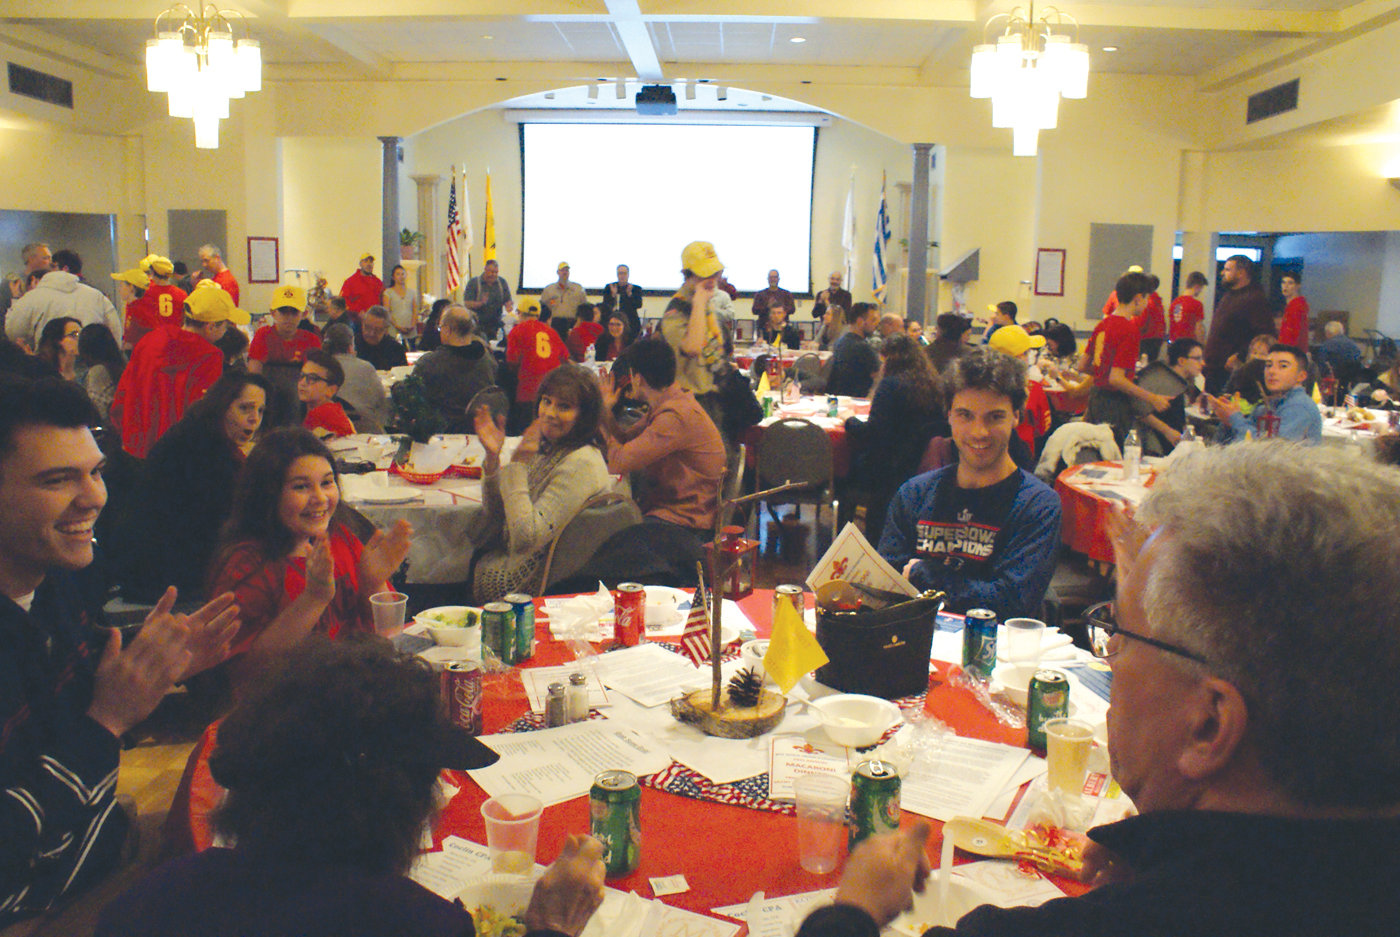 PACKED HOUSE: It was a full house during Troop 6 Cranston’s 28th annual Macaroni Dinner on Sunday. Scouts not only planned the event, but they also served food for approximately 300 visitors. 